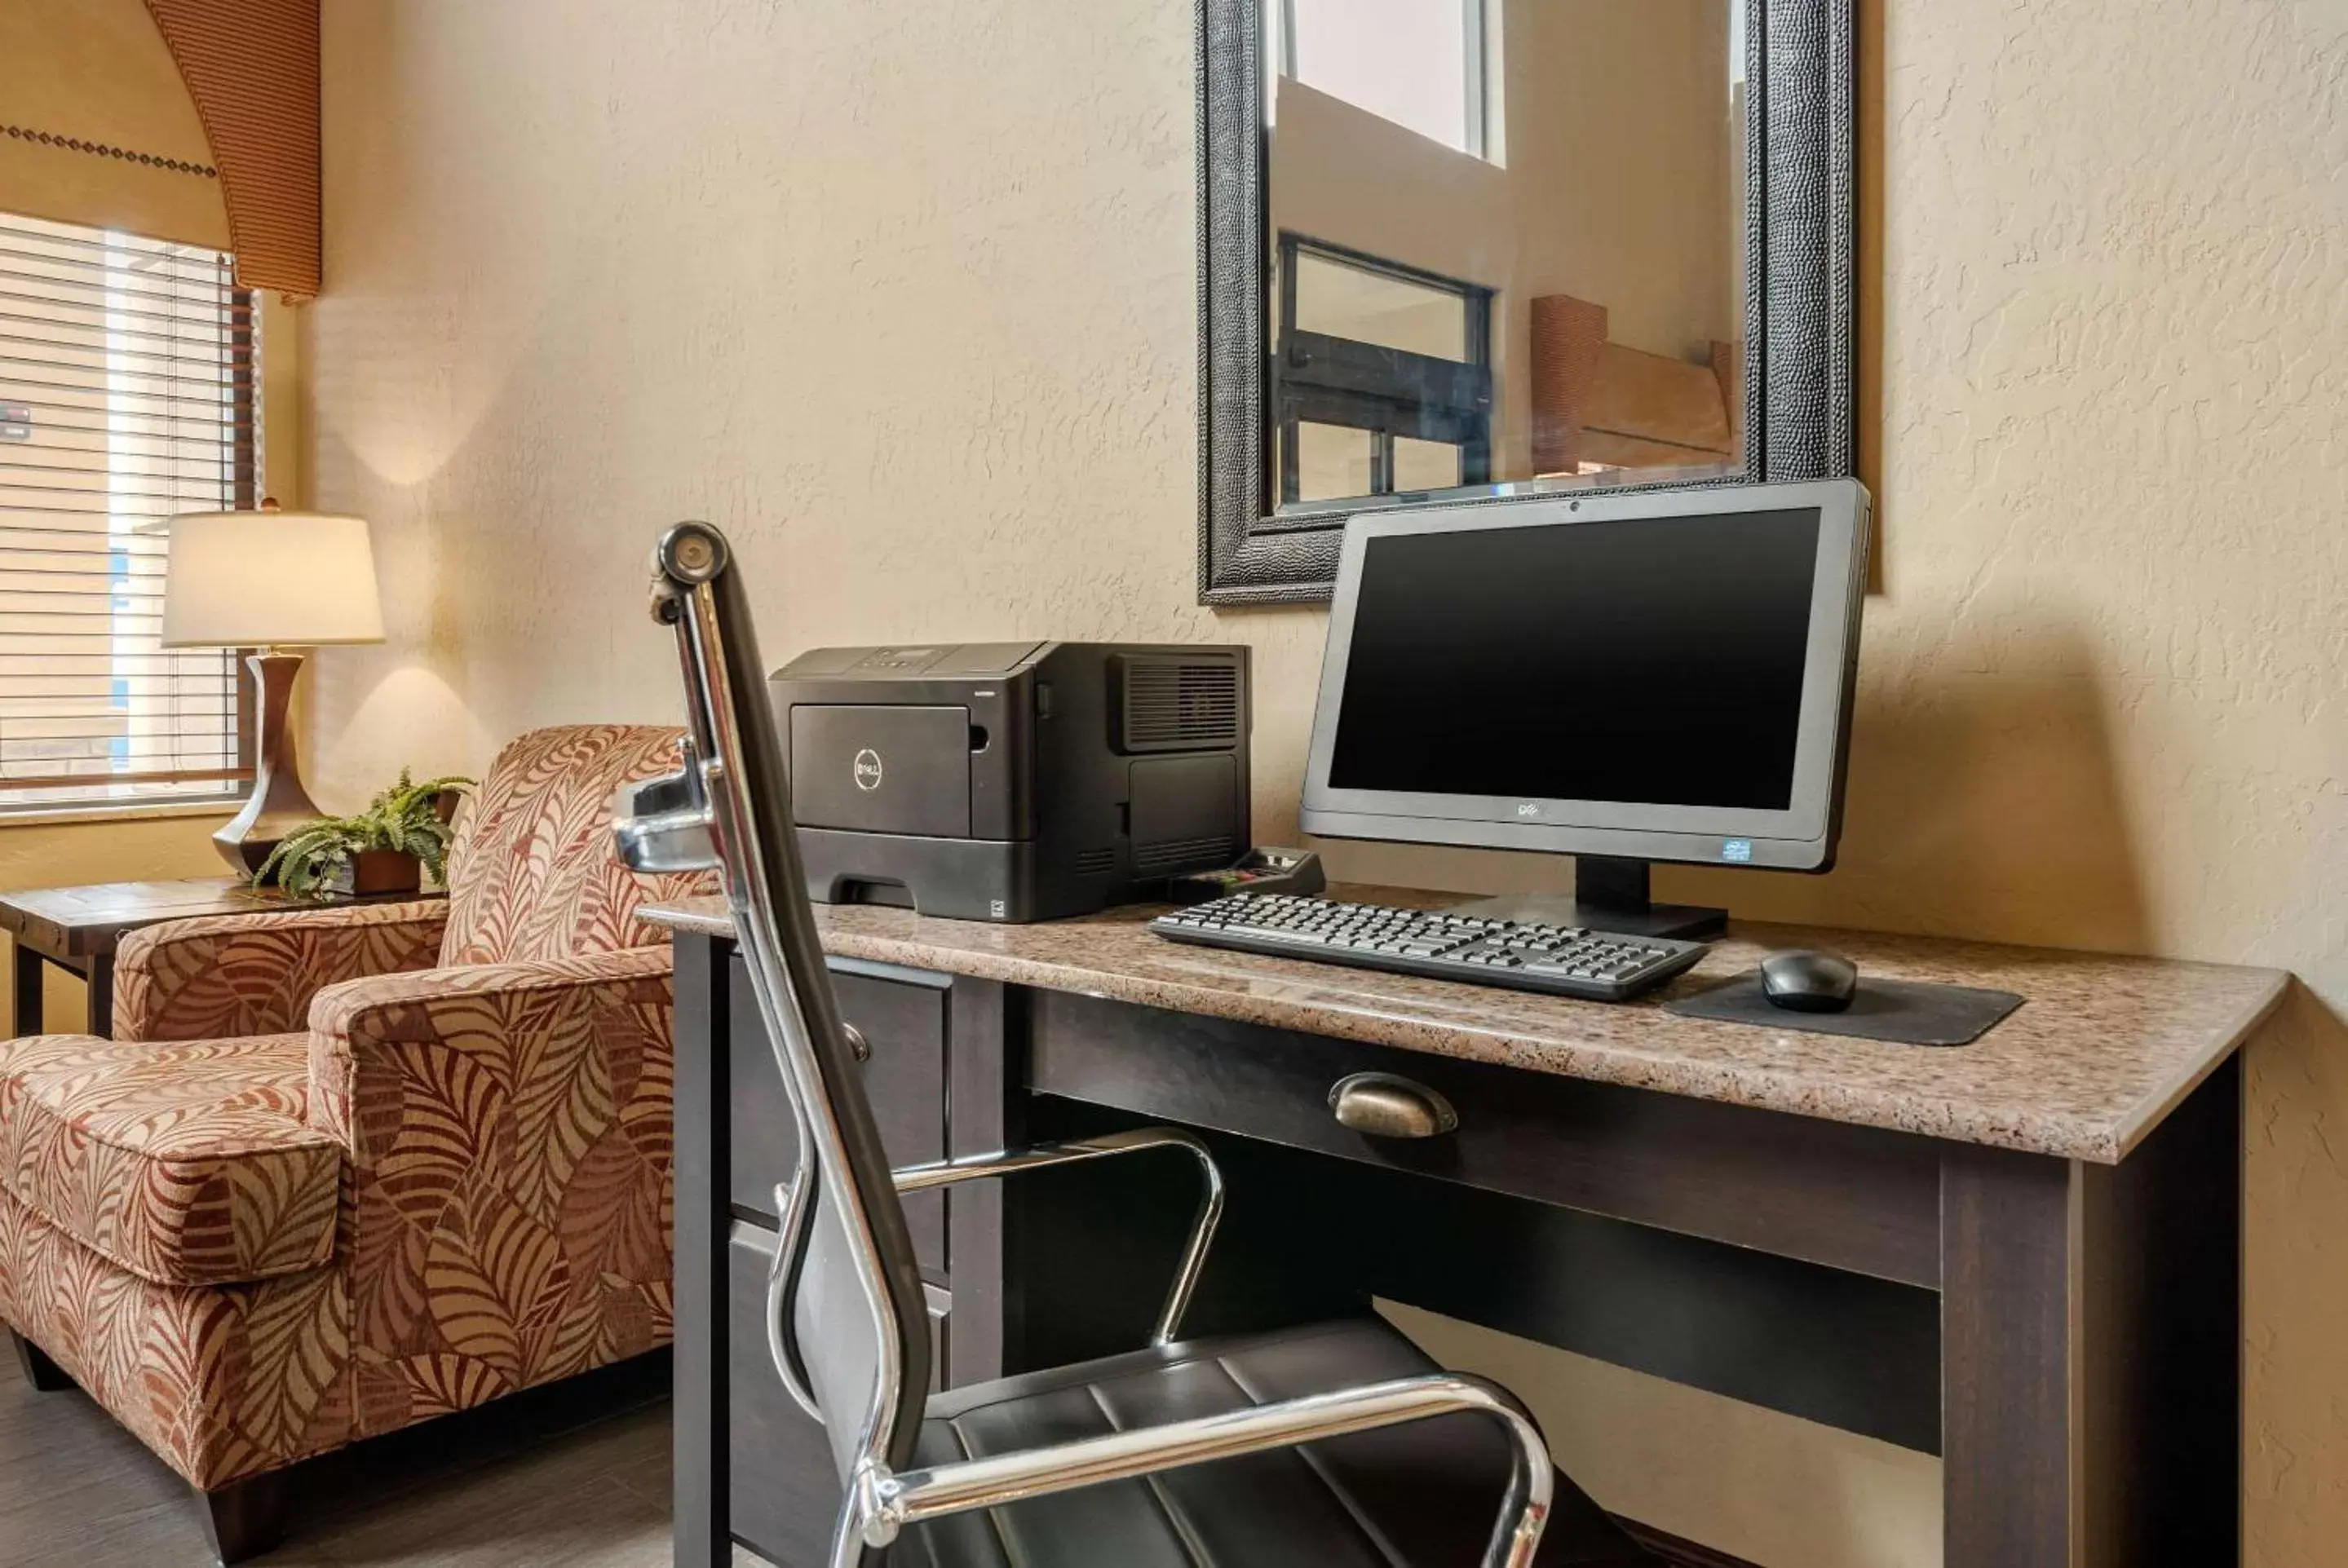 Business facilities in Comfort Suites near Route 66